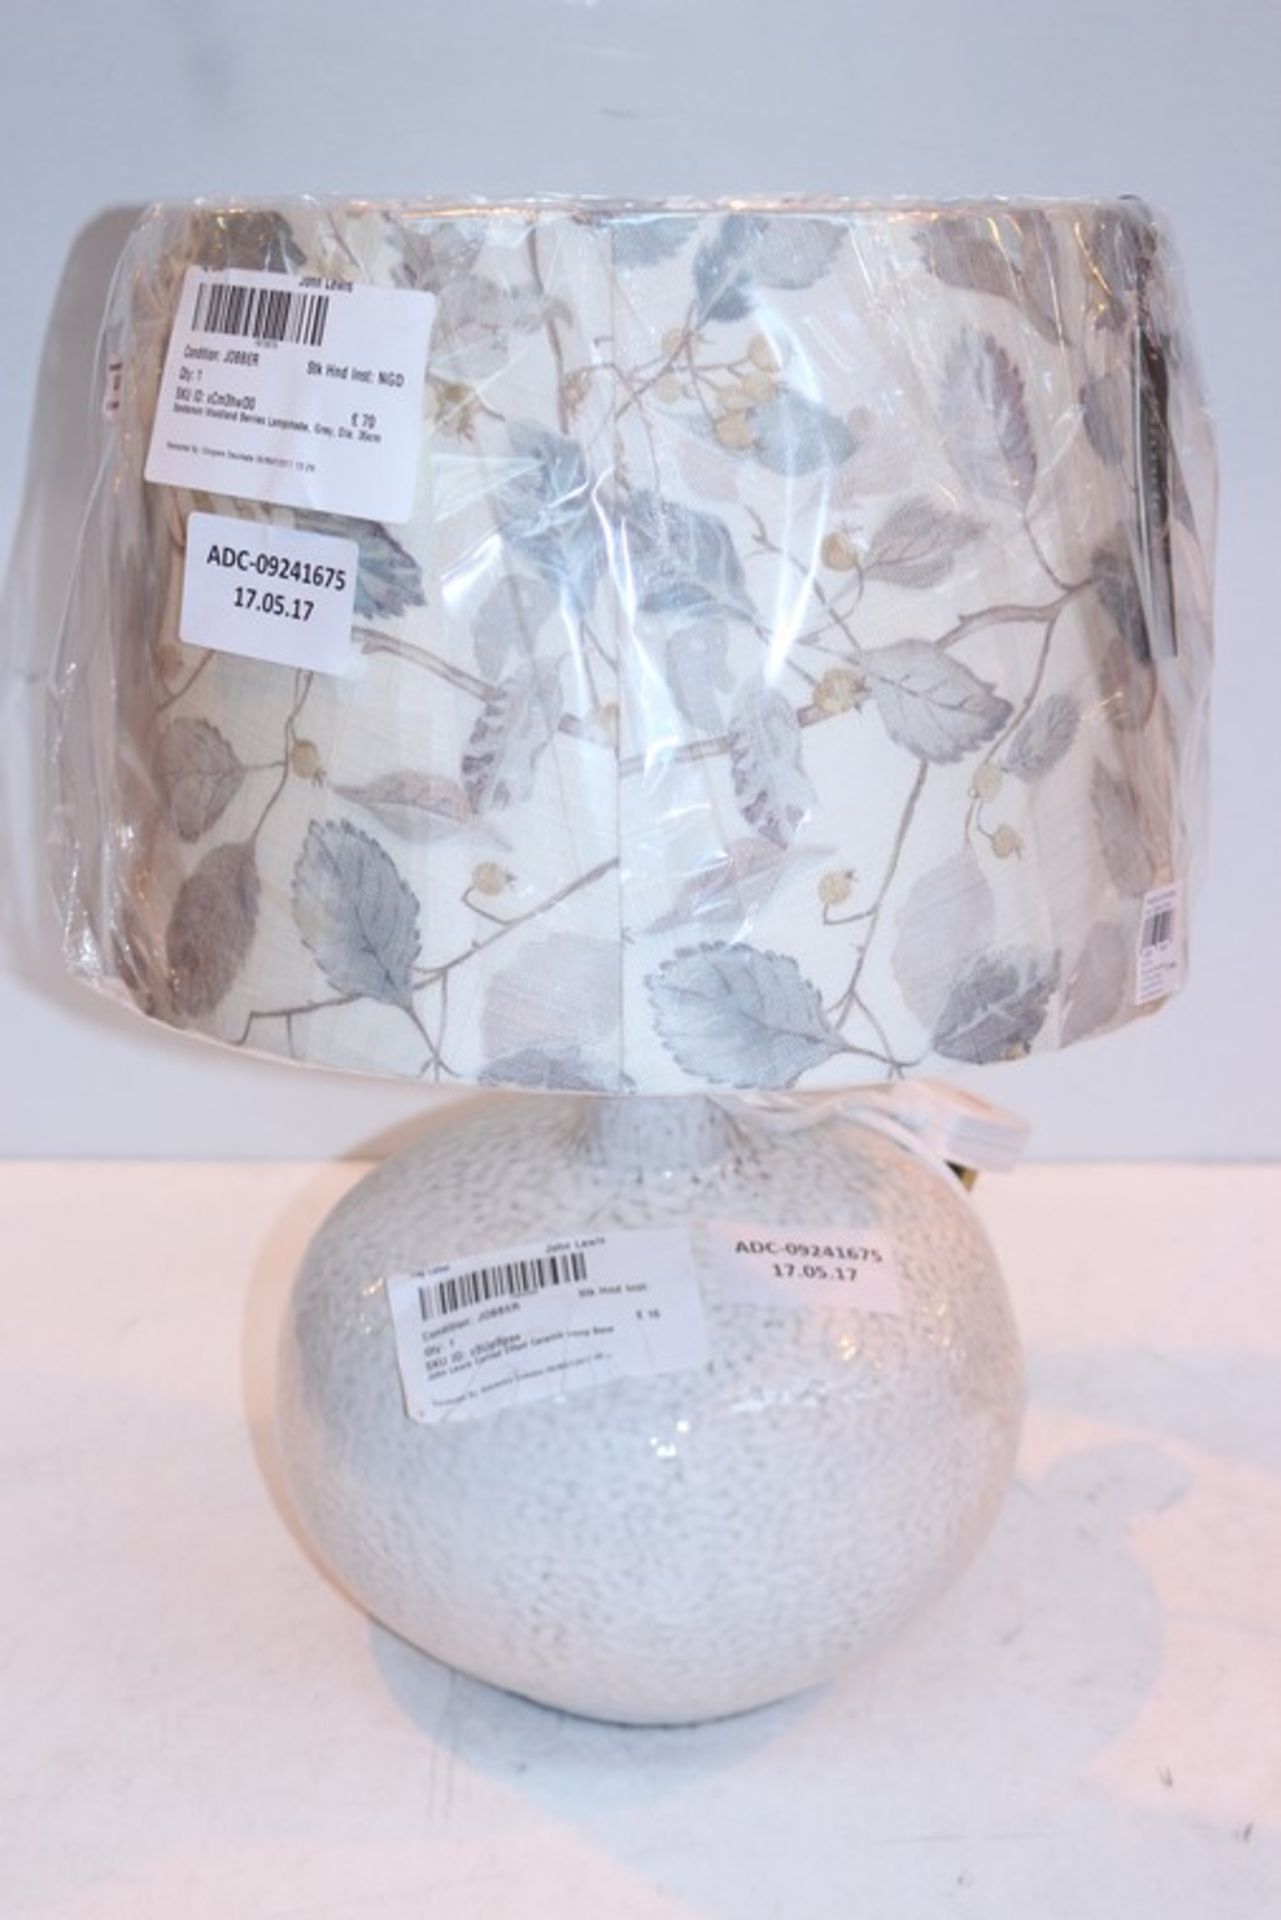 2 x ASSORTED DESIGNER LAMP SHADES BY SANDERSON AND HARLEQUIN RRP £60-£70 (17.5.17) *PLEASE NOTE THAT